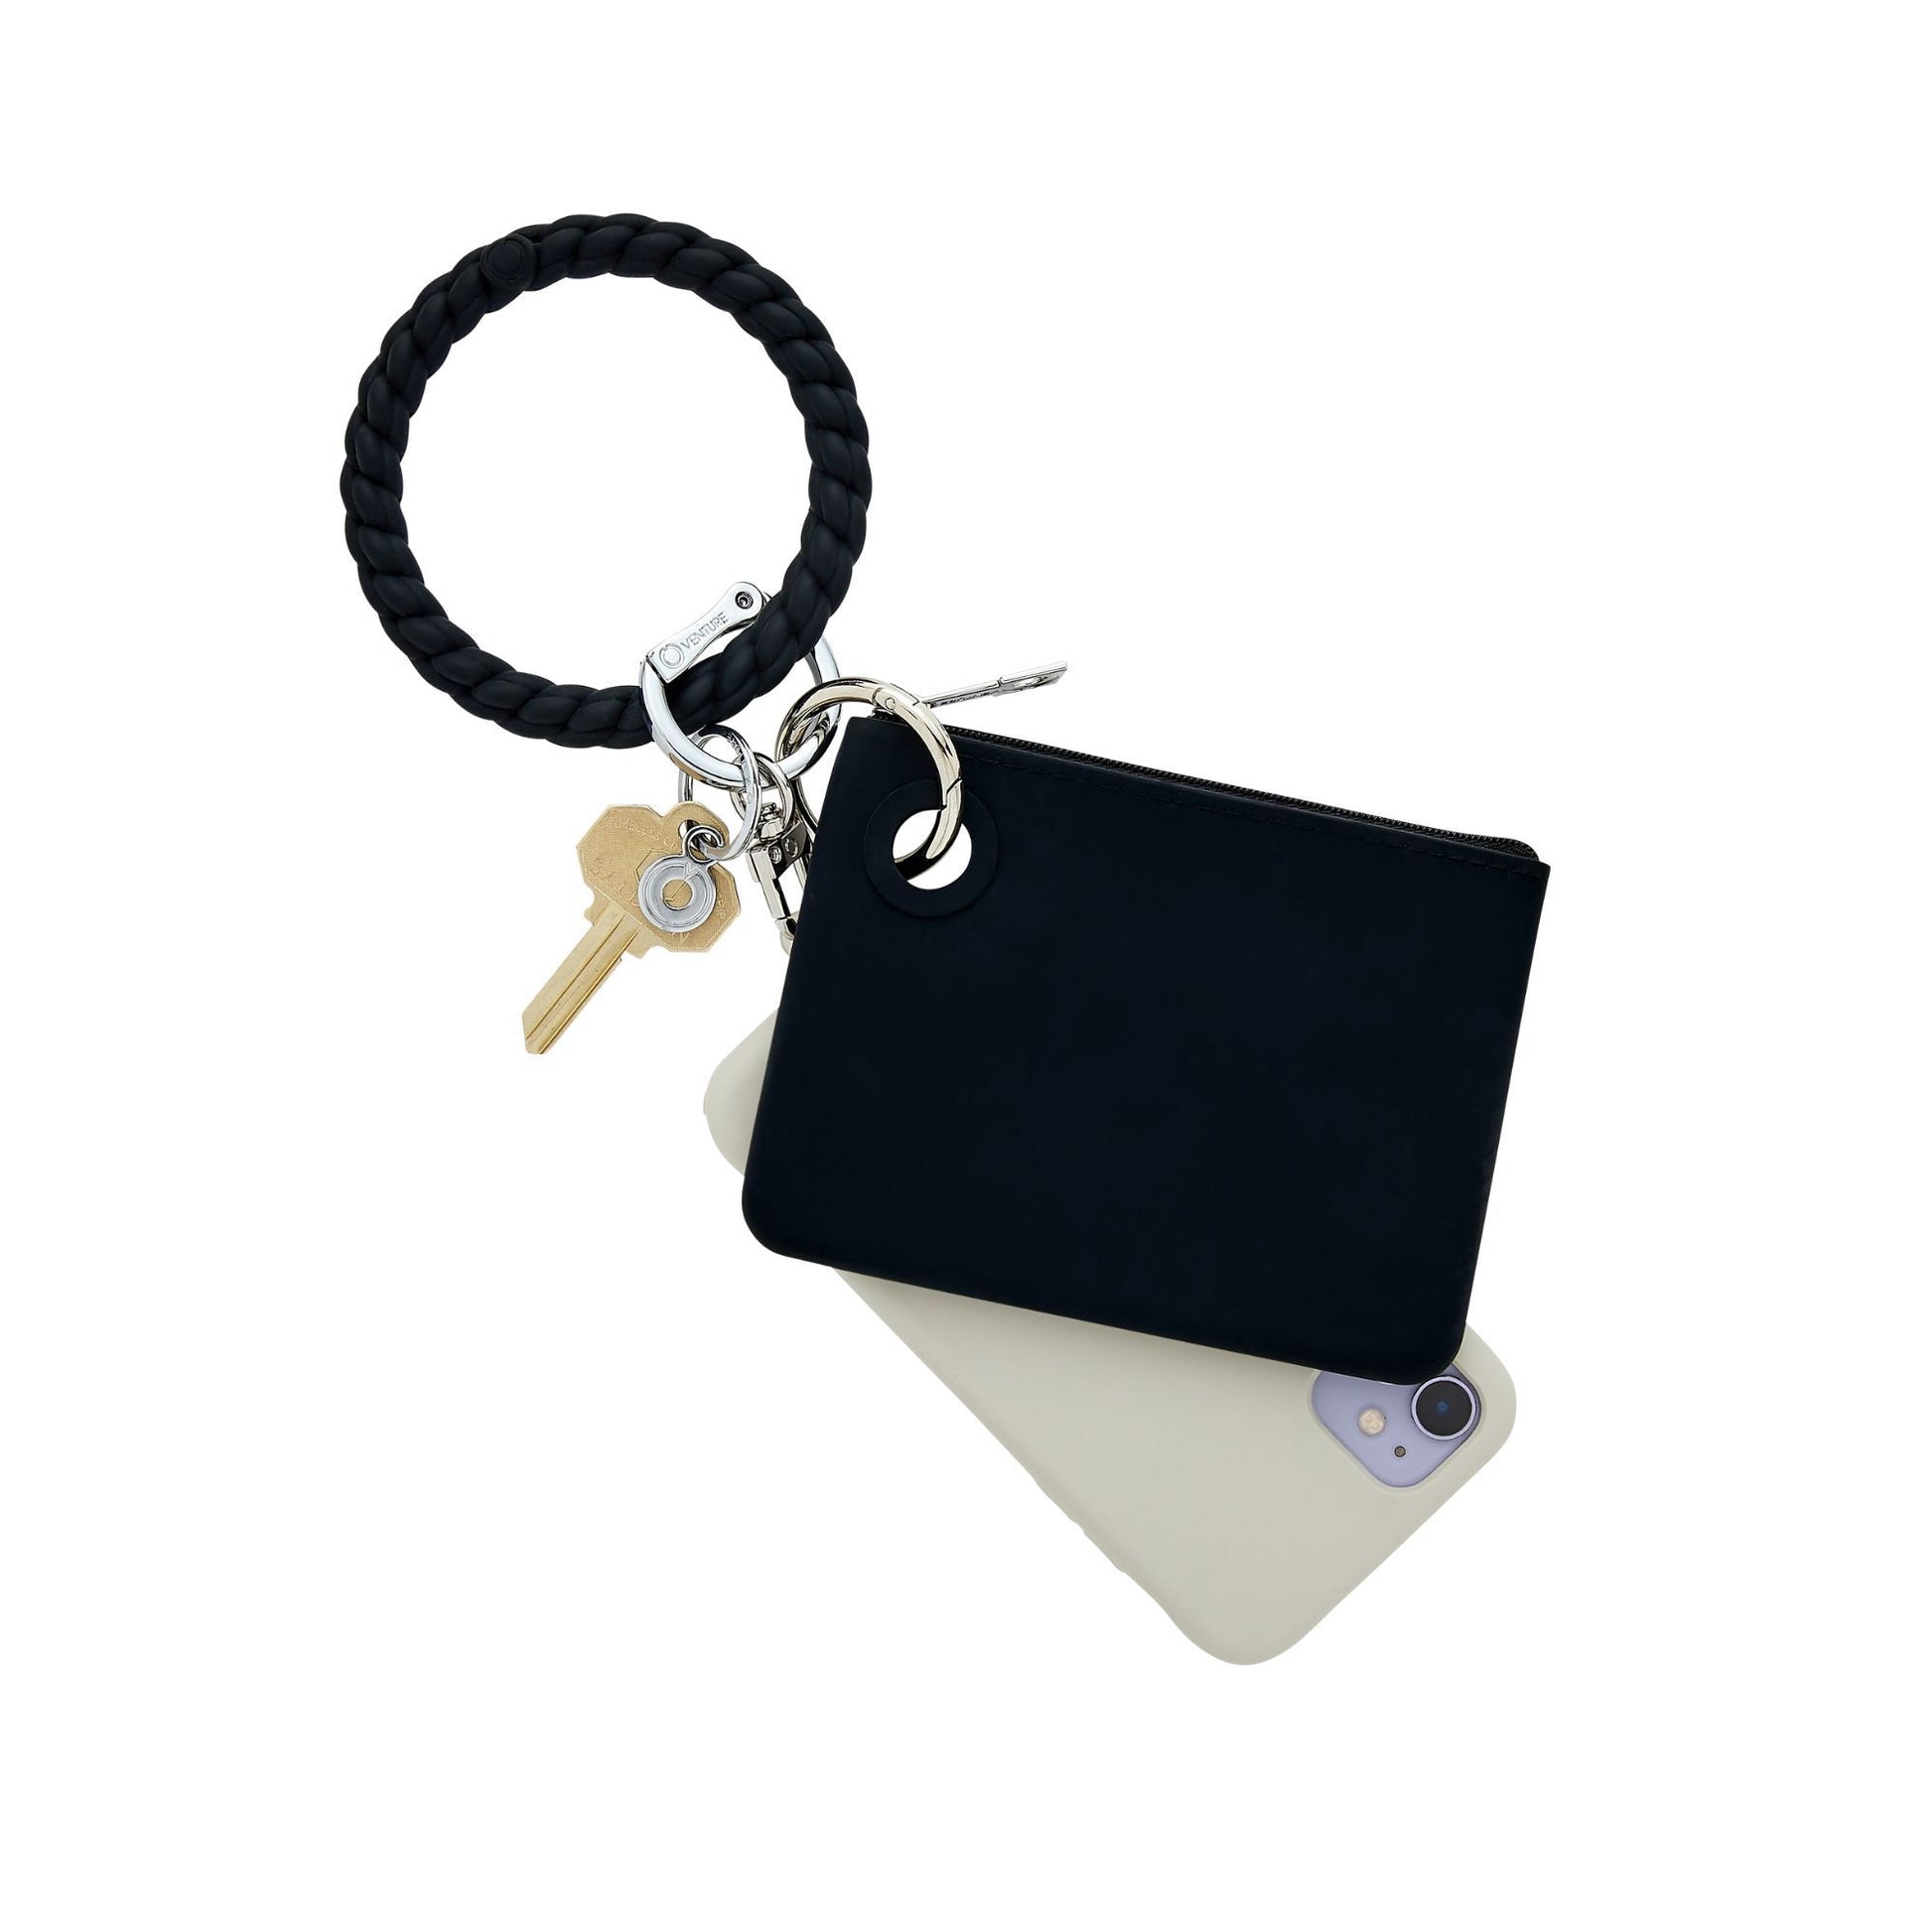 Key ring wallet set in black silicone with phone attached  and keyring wallet attached by carabiner.